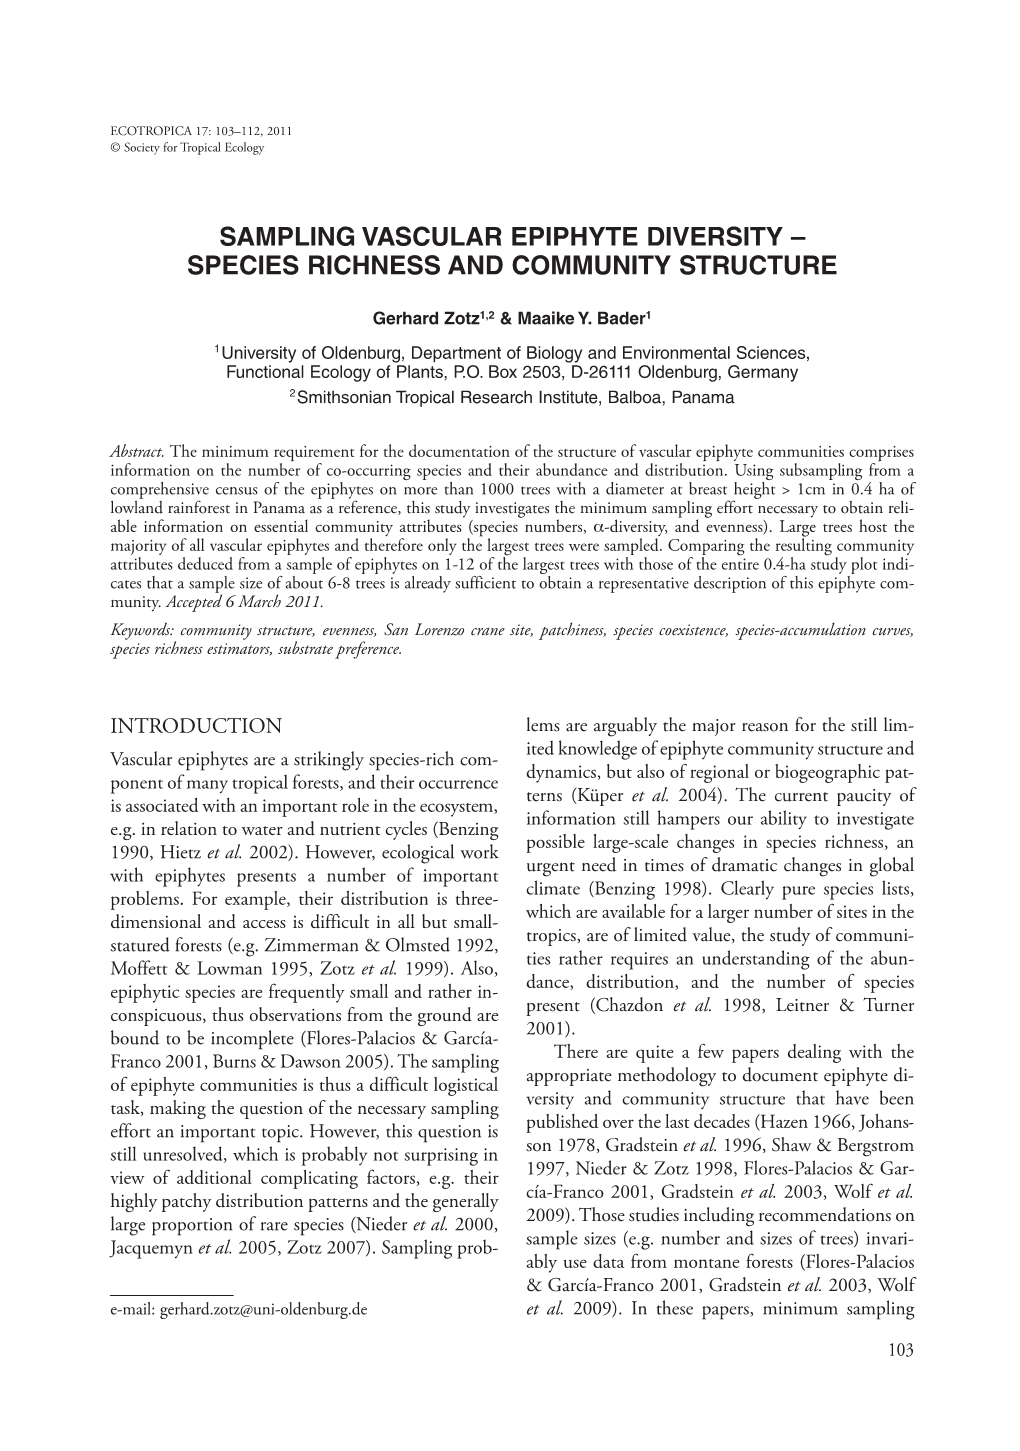 Sampling Vascular Epiphyte Diversity – Species Richness and Community Structure